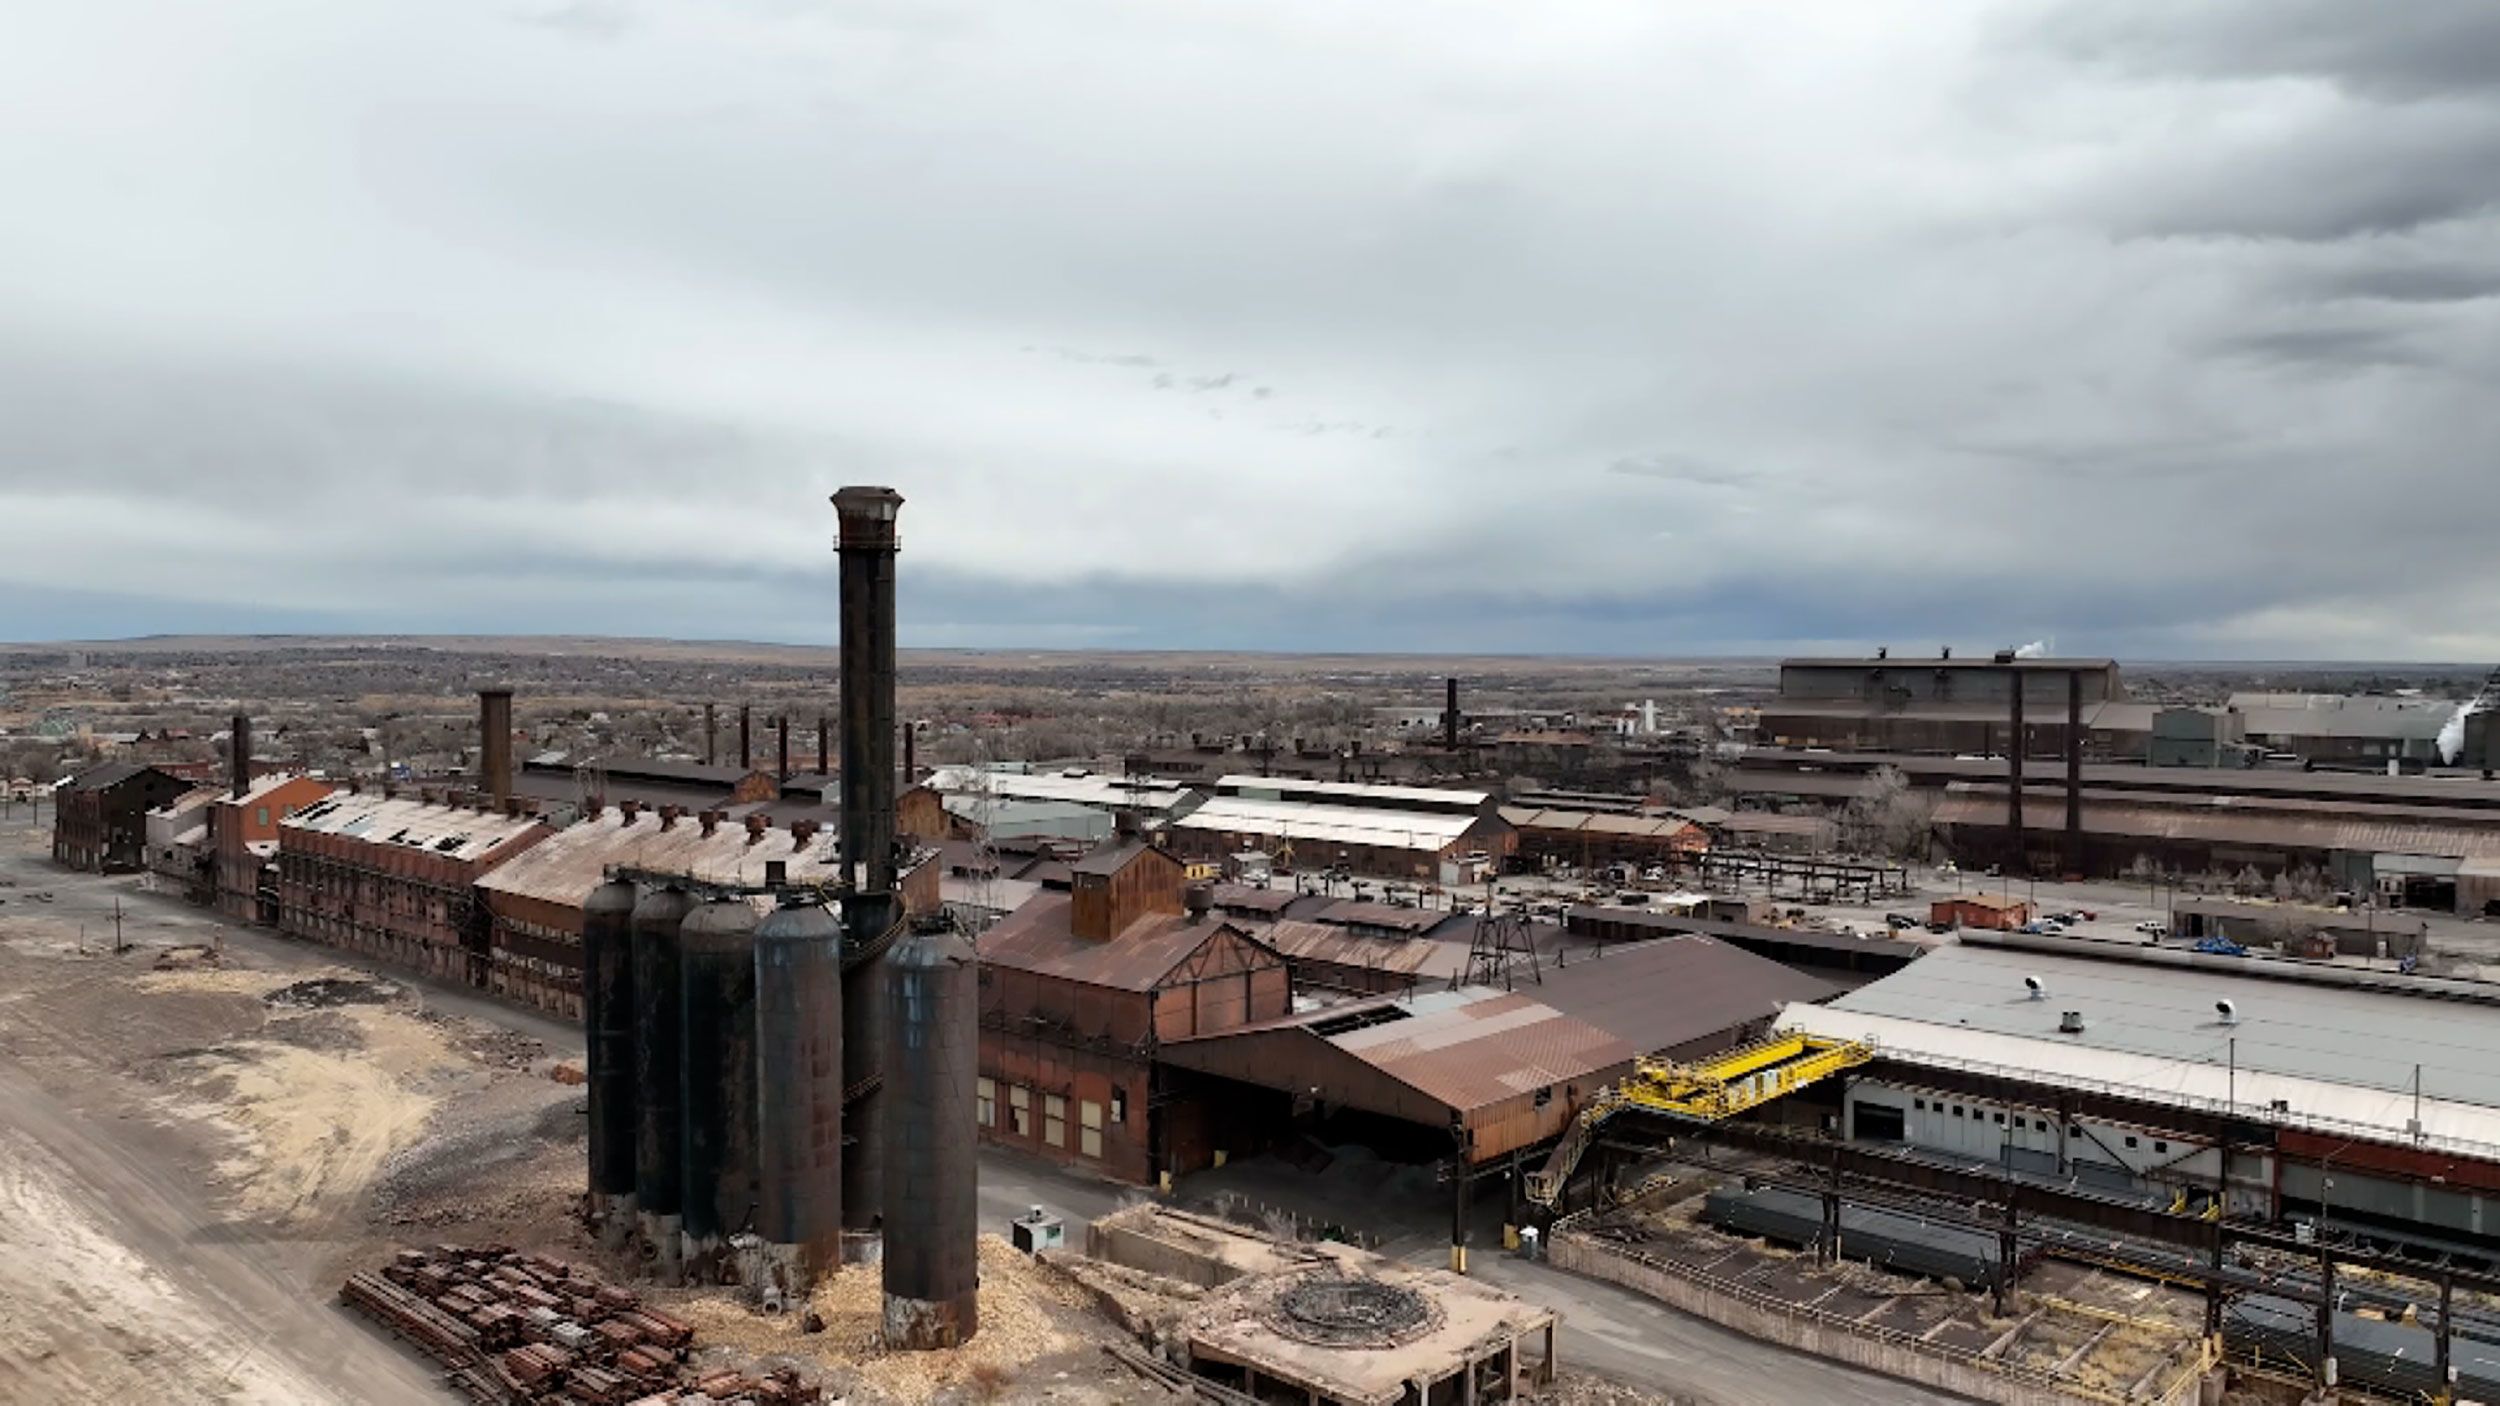 This Colorado steel mill 'built the American west,' but its ownership has  ties to Russia